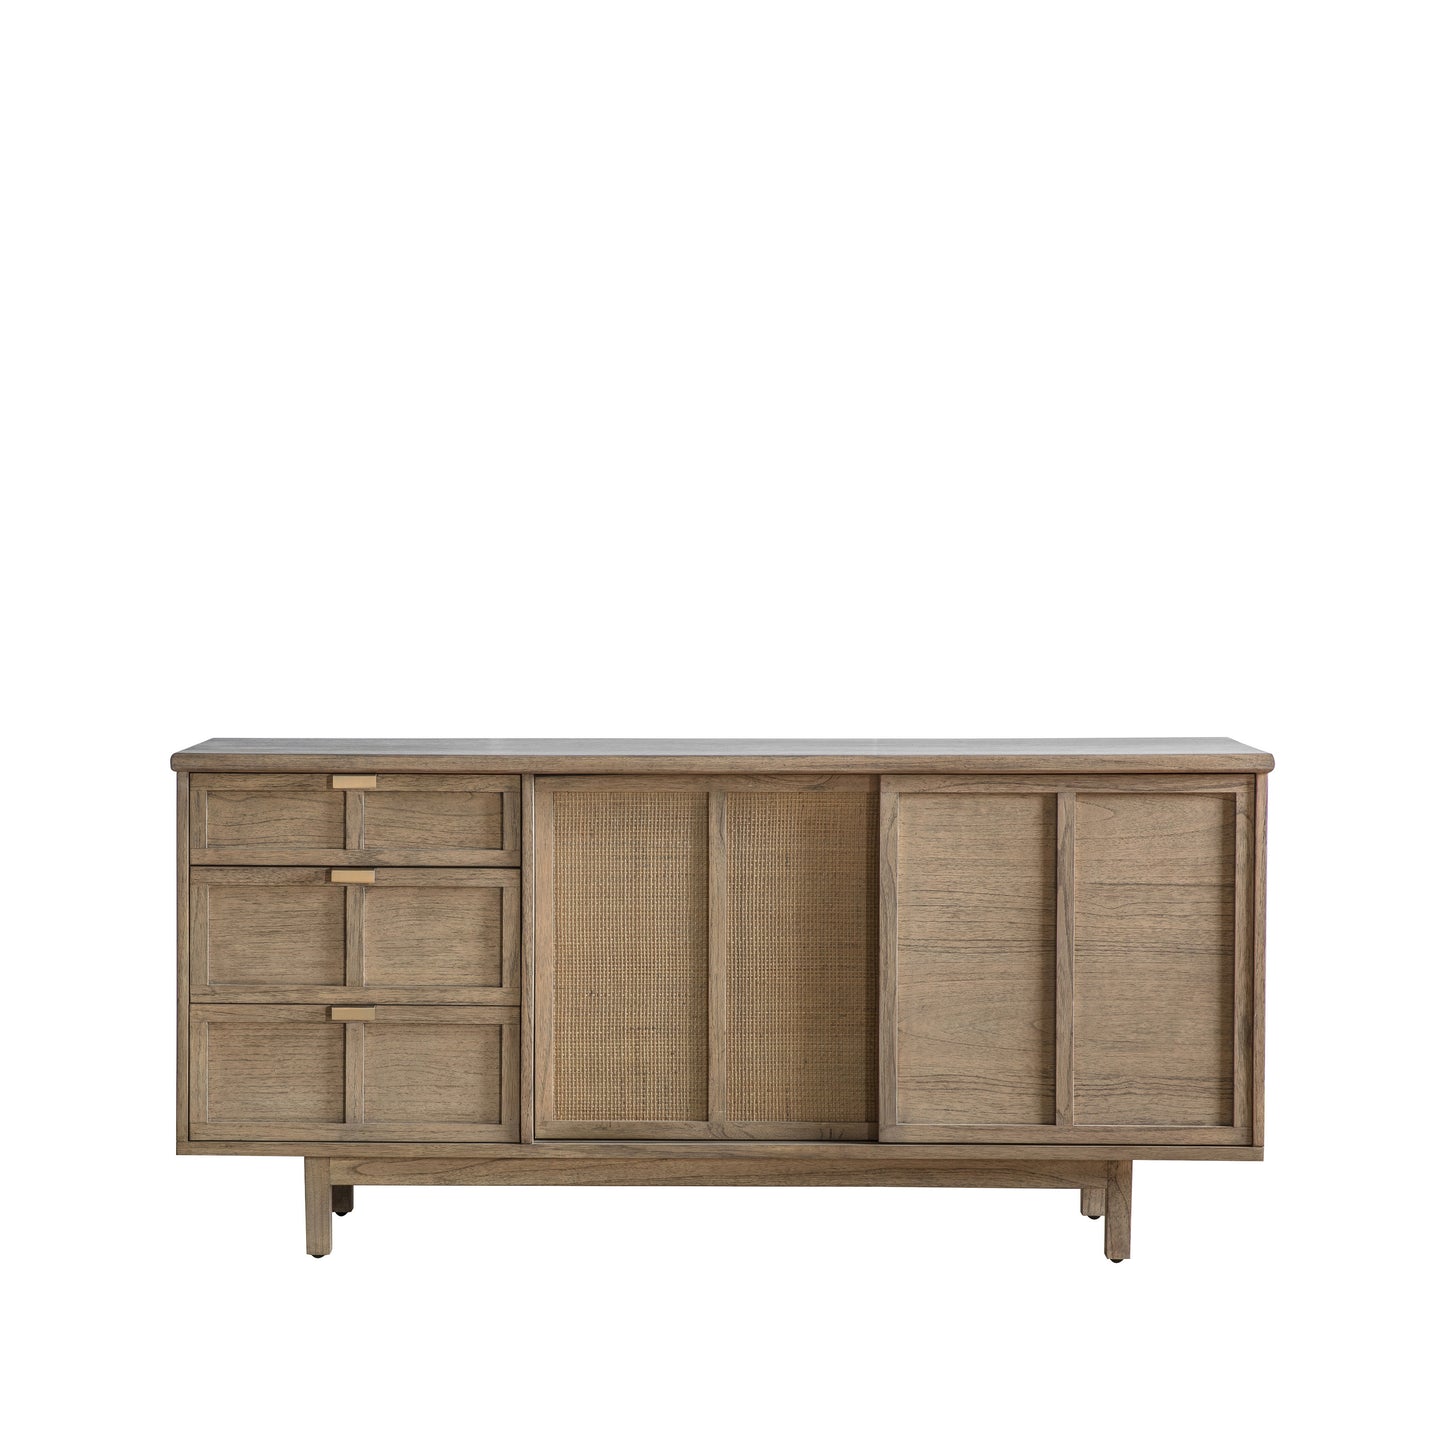 The Kikiathome.co.uk Alvington 3 Drawer 2 Door Sideboard 1500x450x700mm is a wooden piece of home furniture with two drawers.